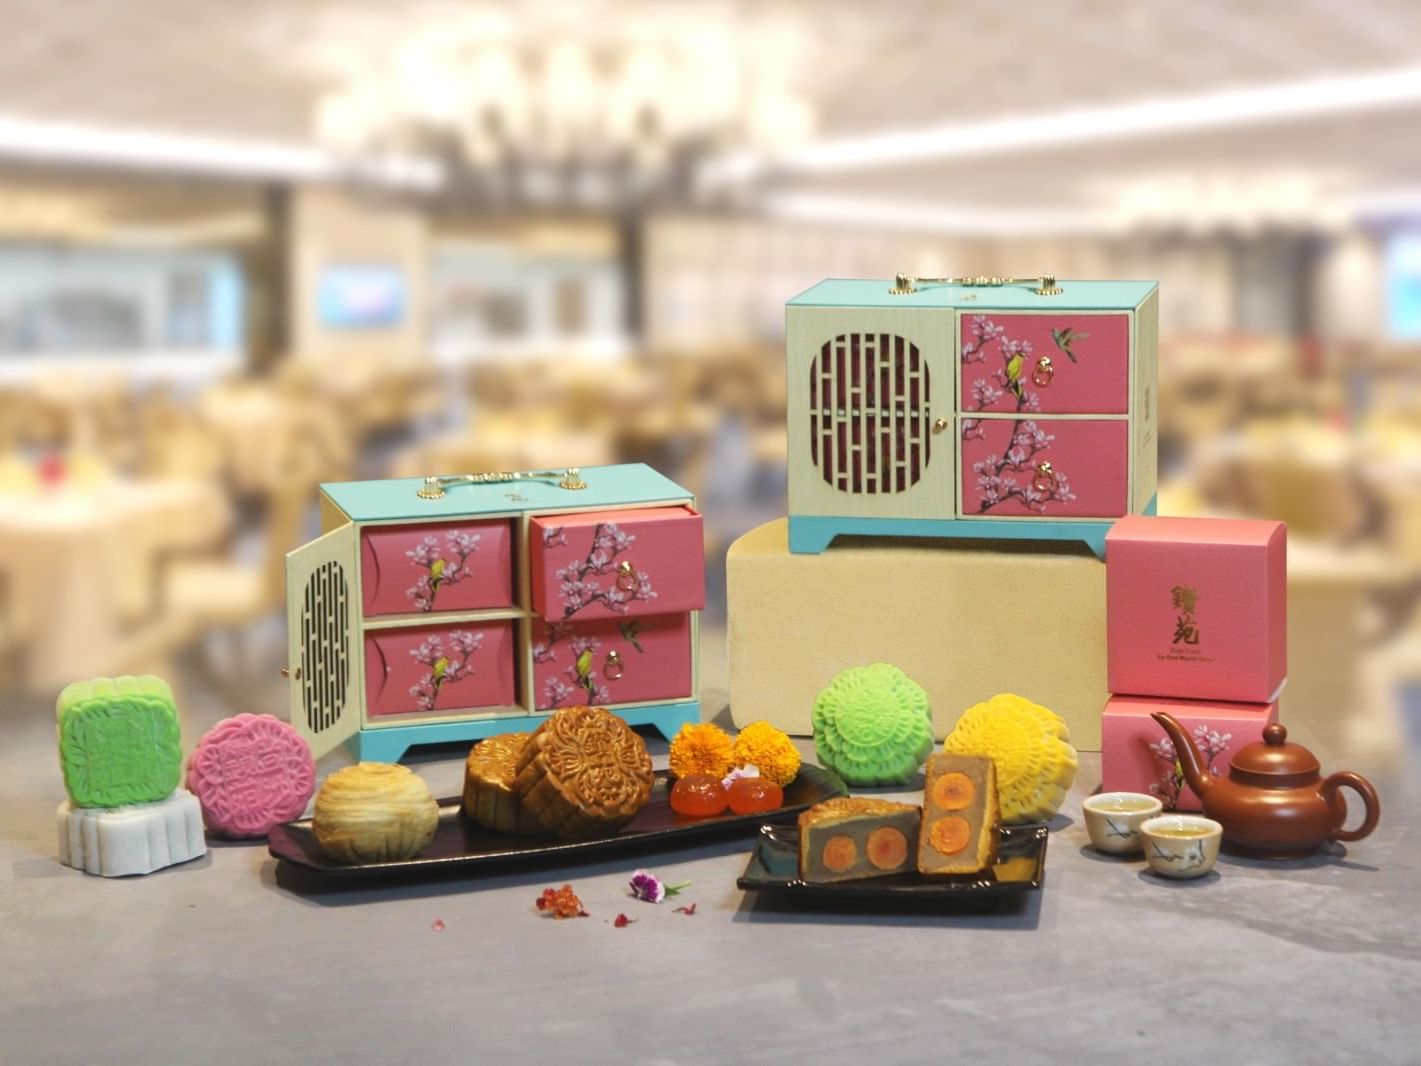 A variety of traditional baked and snow skin mooncakes available for One World Hotel deals in PJ